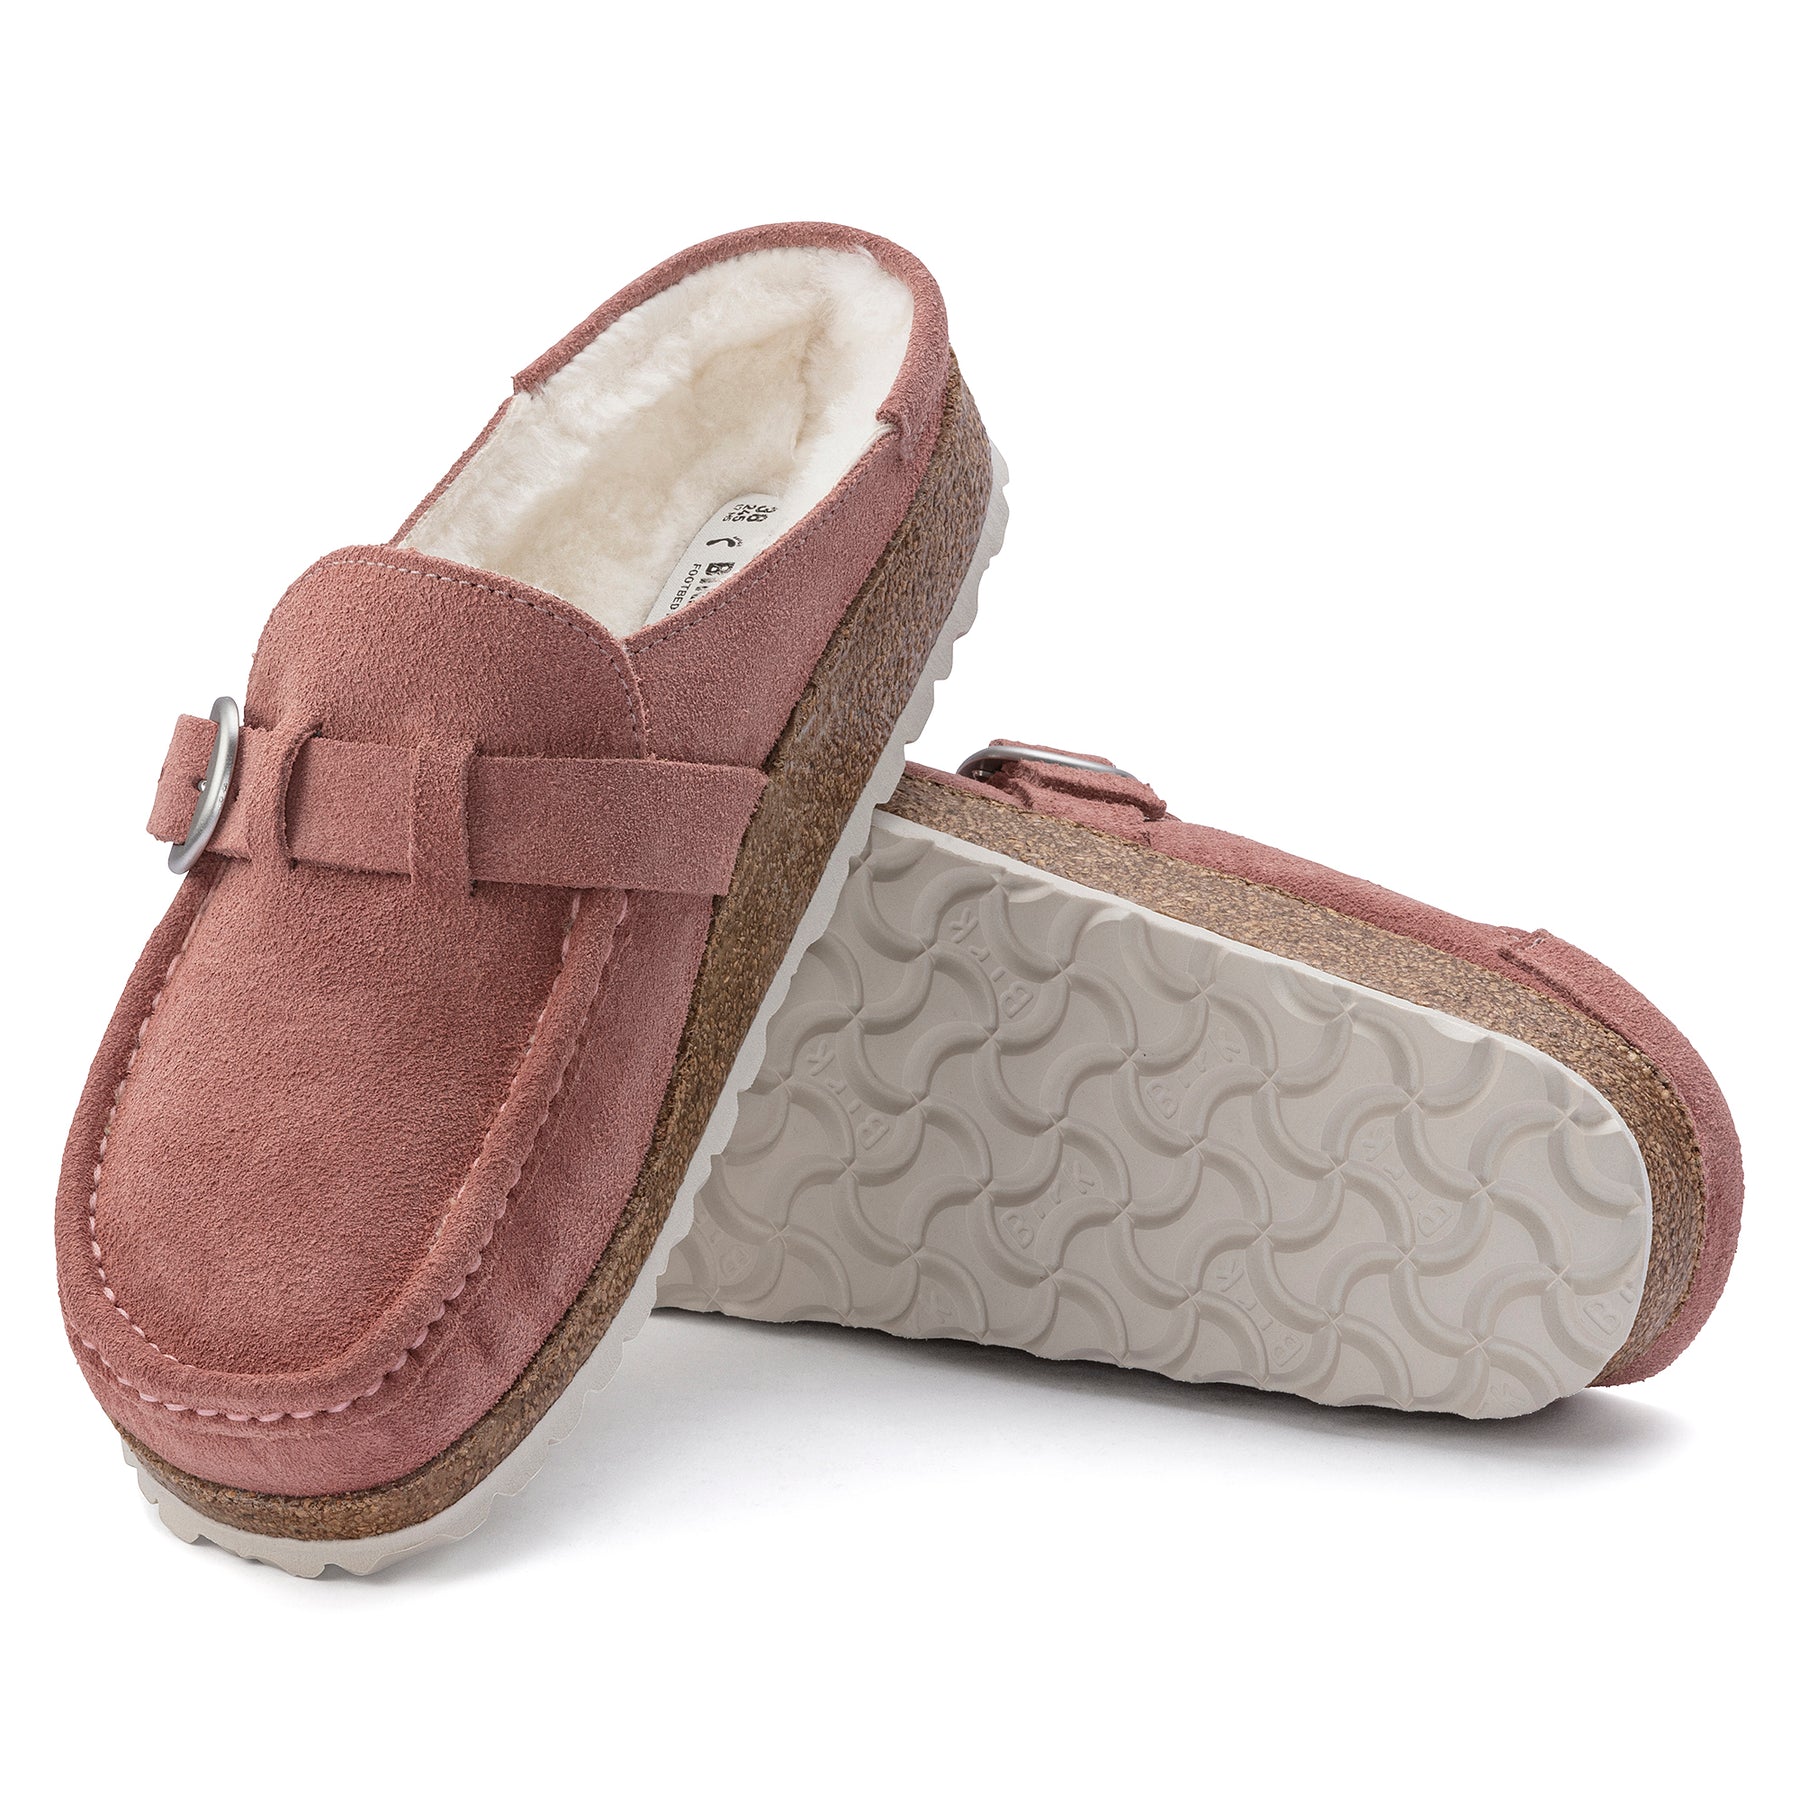 Birkenstock Limited Edition Buckley pink clay suede/natural shearling